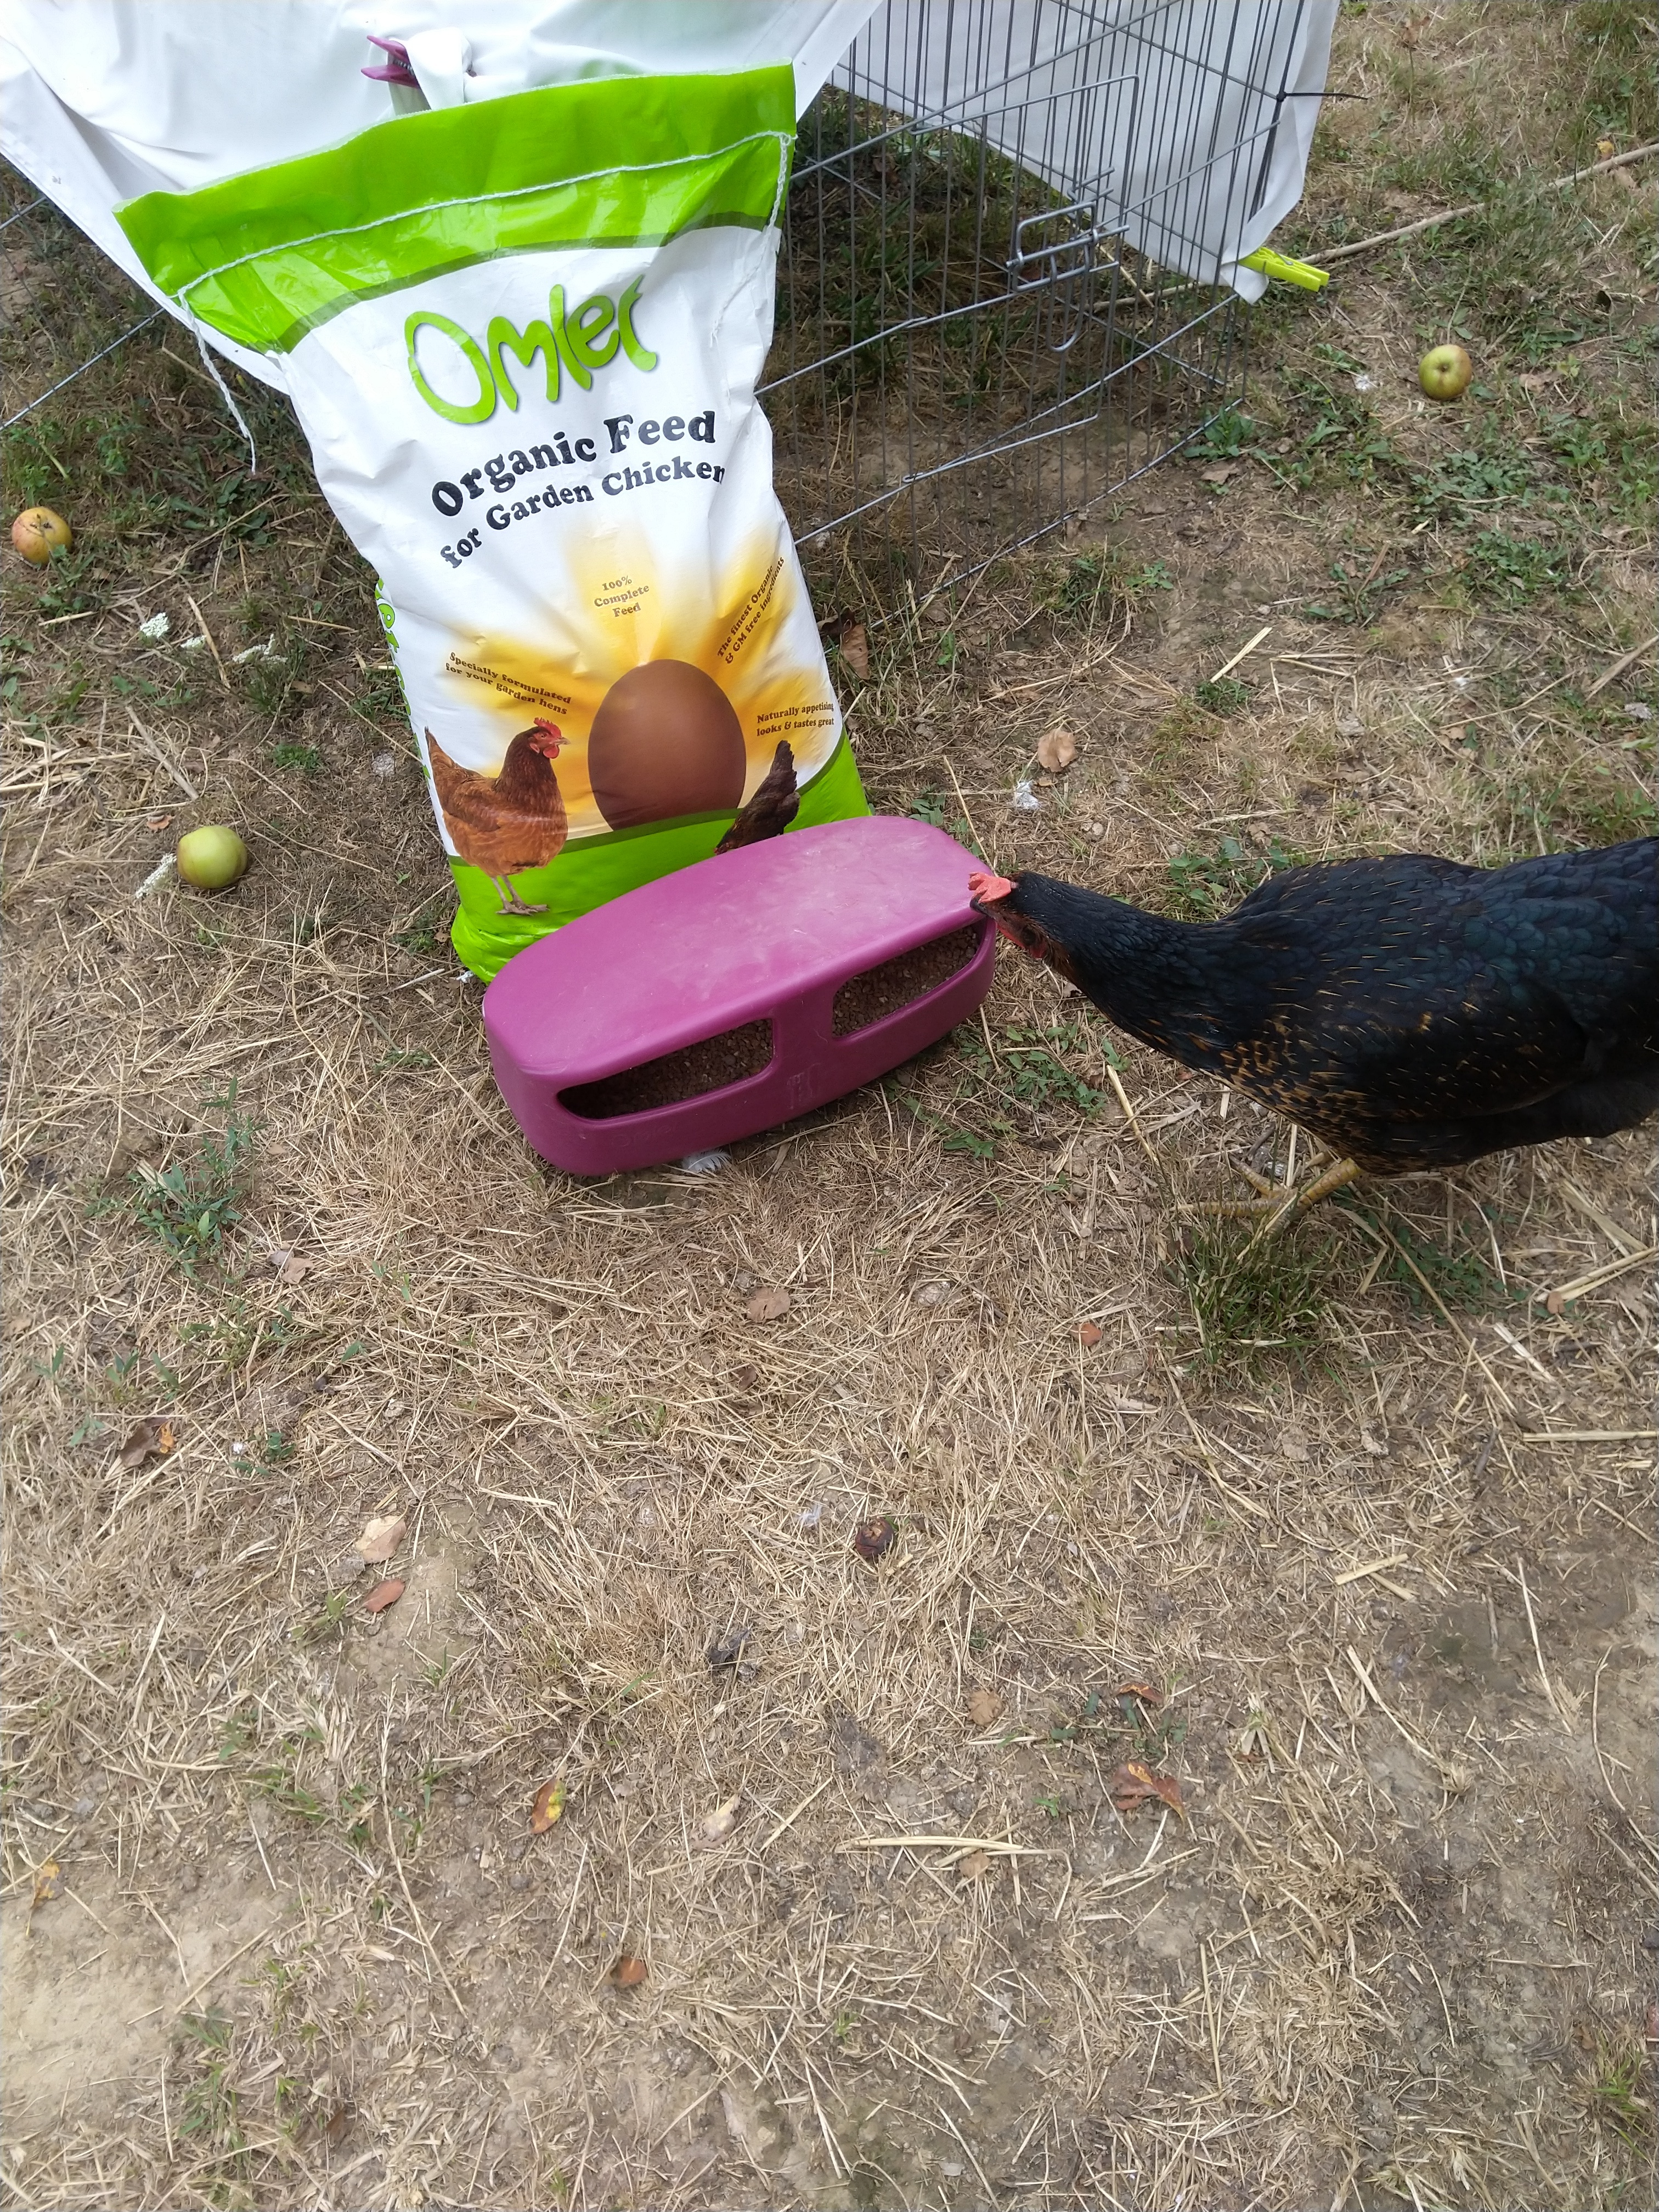 Omlet Organic Chicken Feed and Chicken with feeder